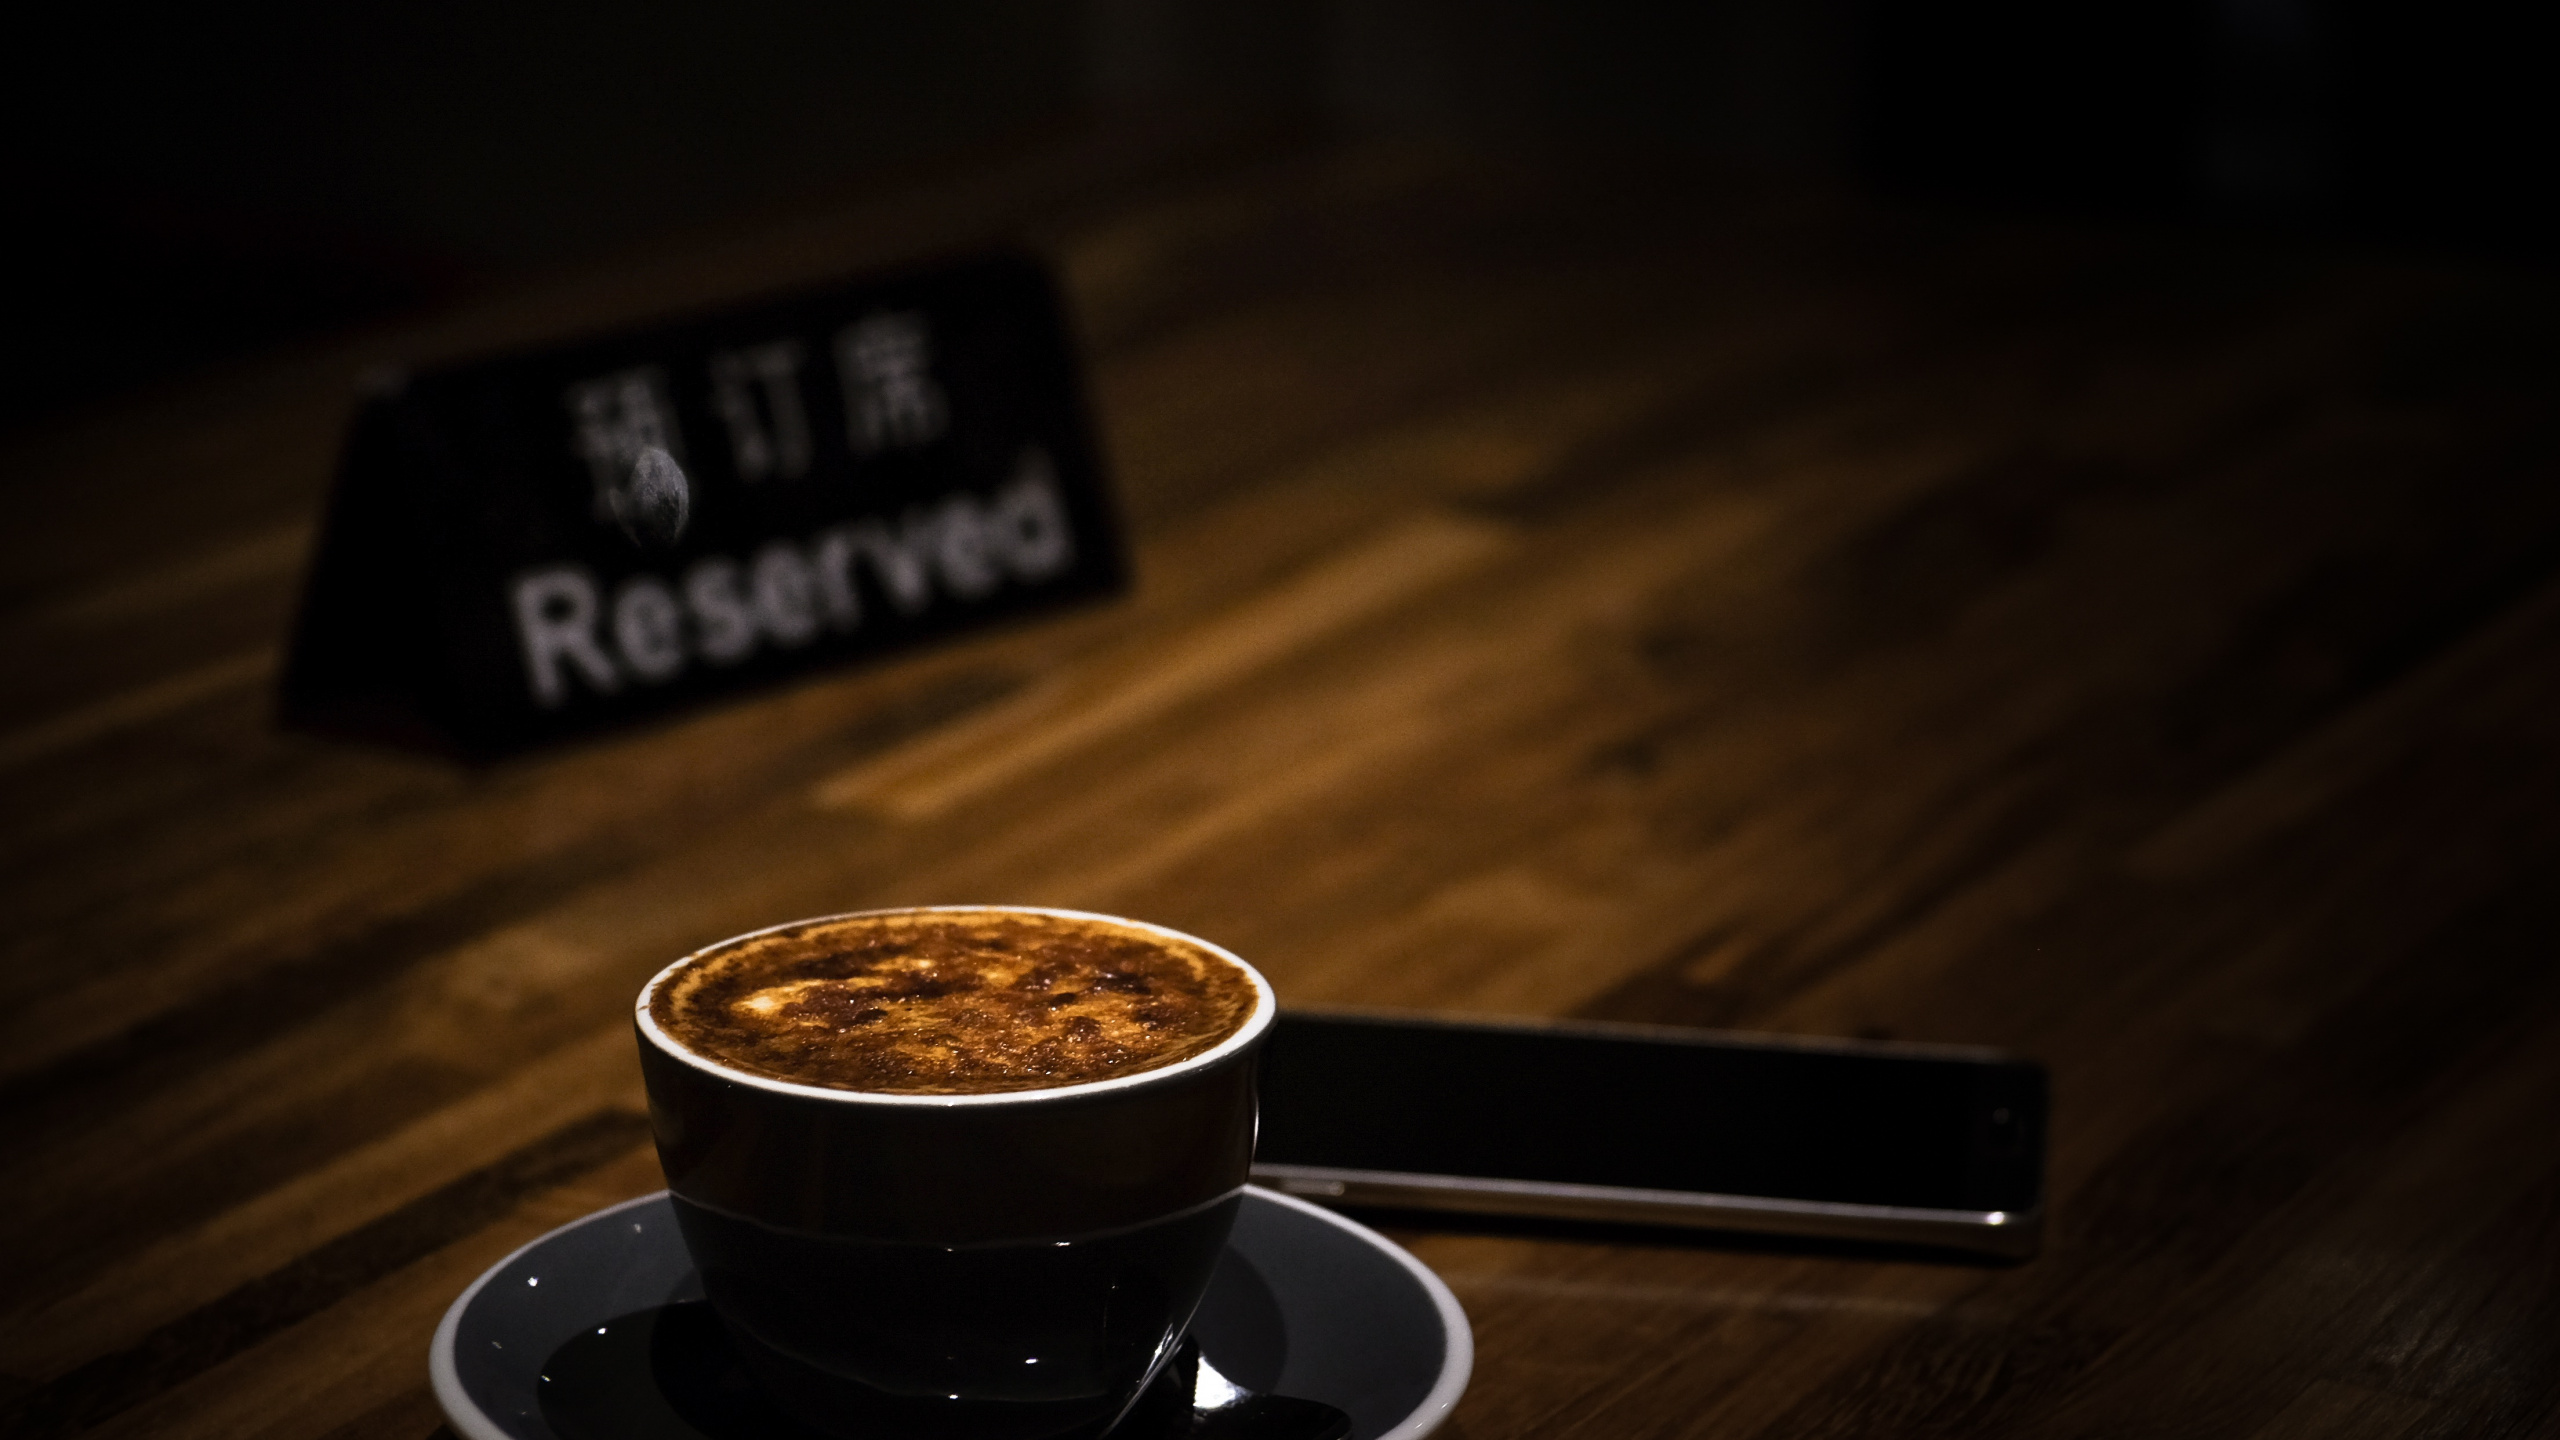 Black Ceramic Cup on Saucer. Wallpaper in 2560x1440 Resolution